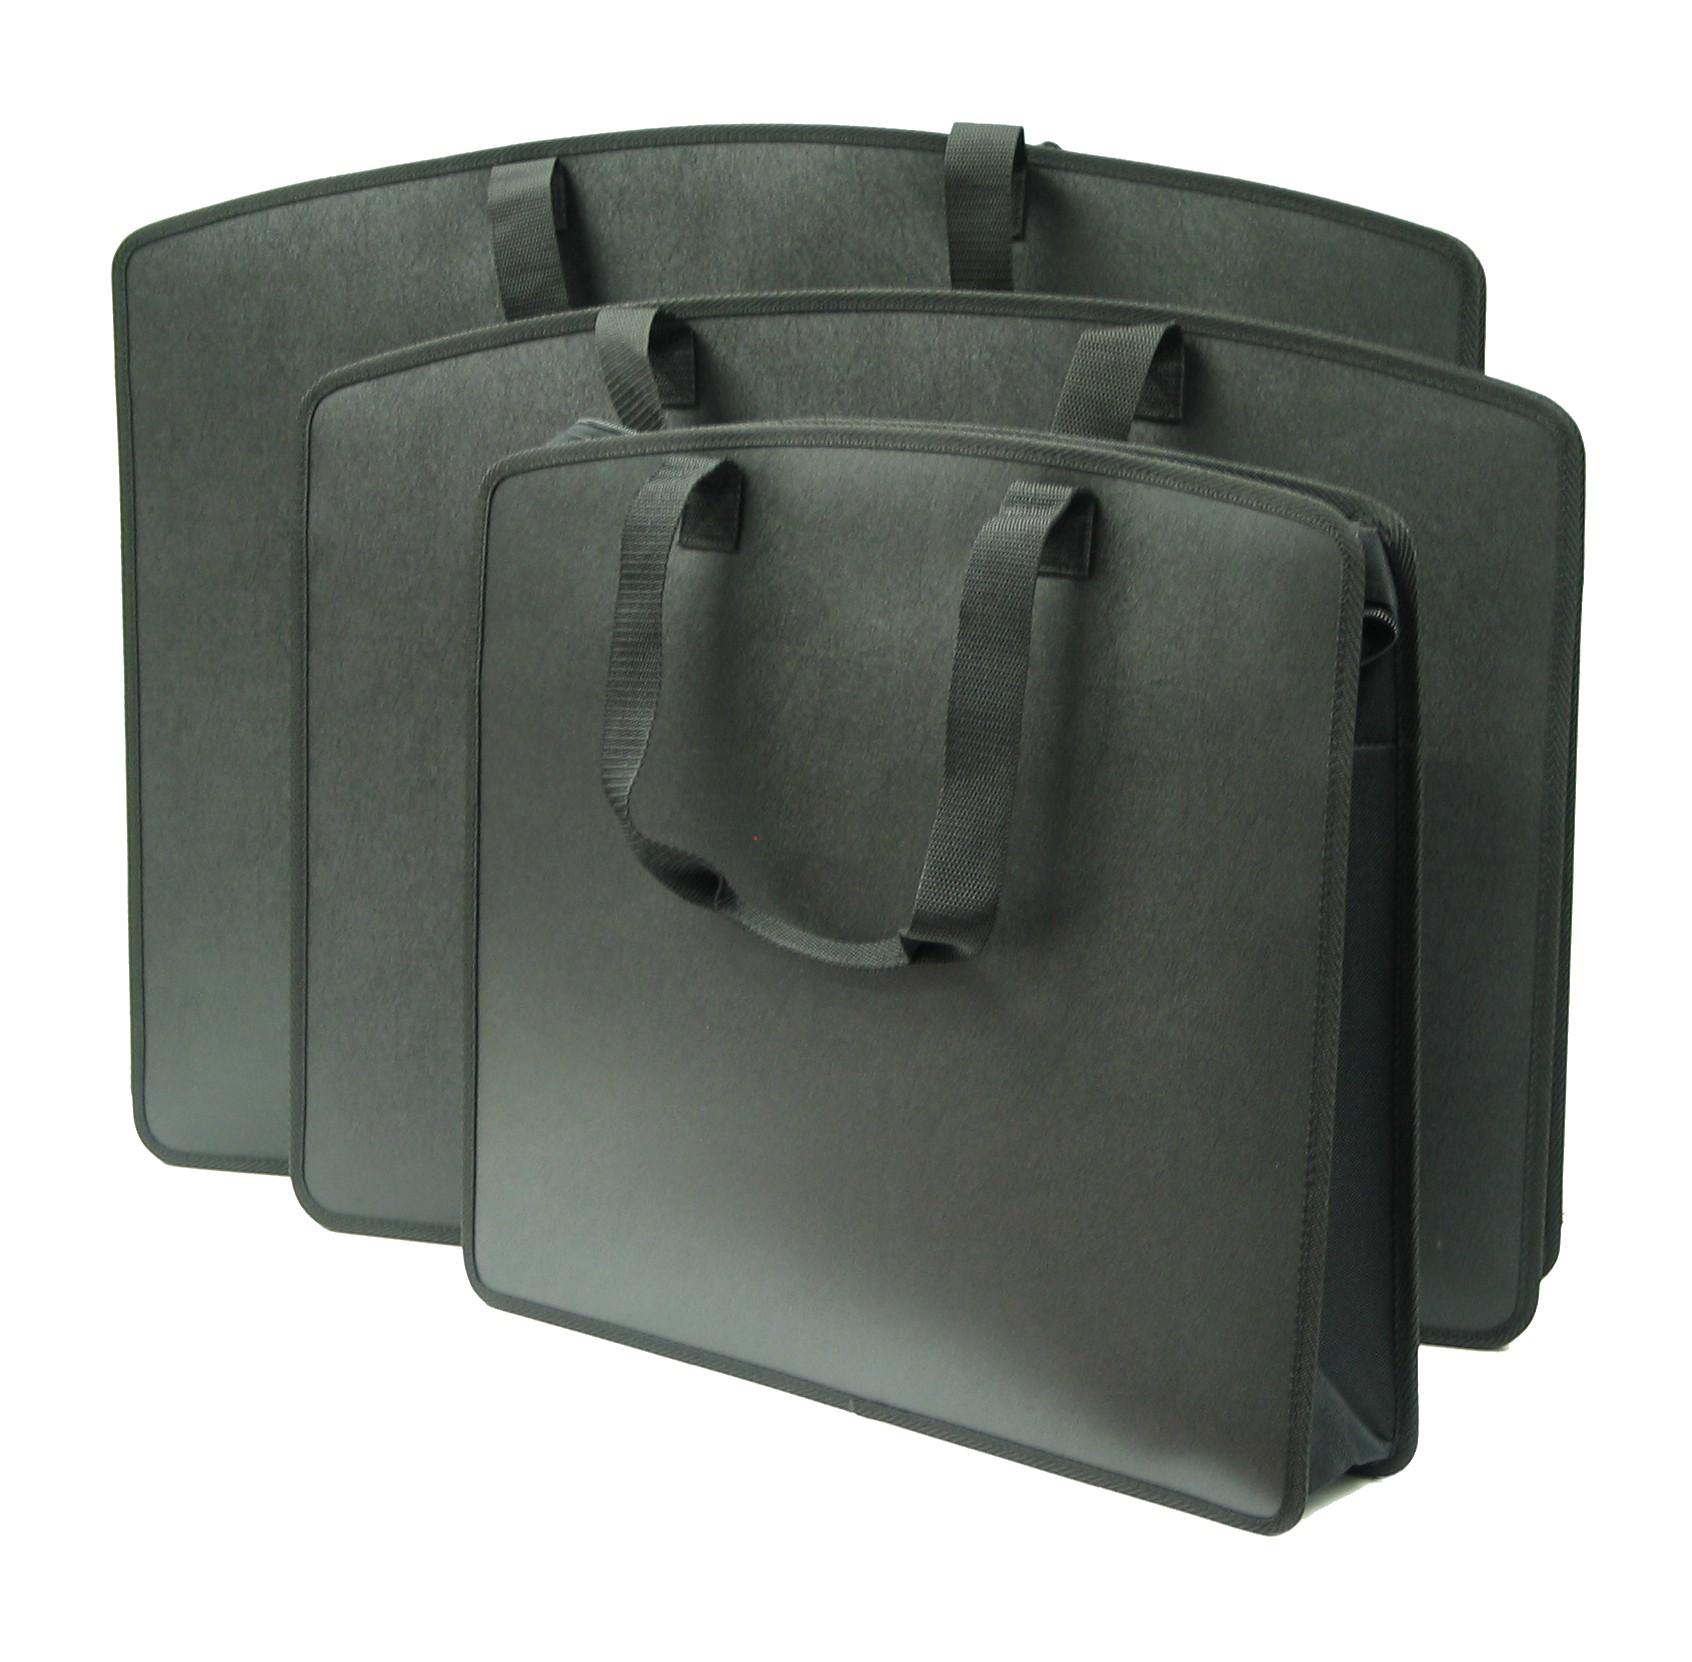 Durable Black Color Carry All Tote Cases With Handles